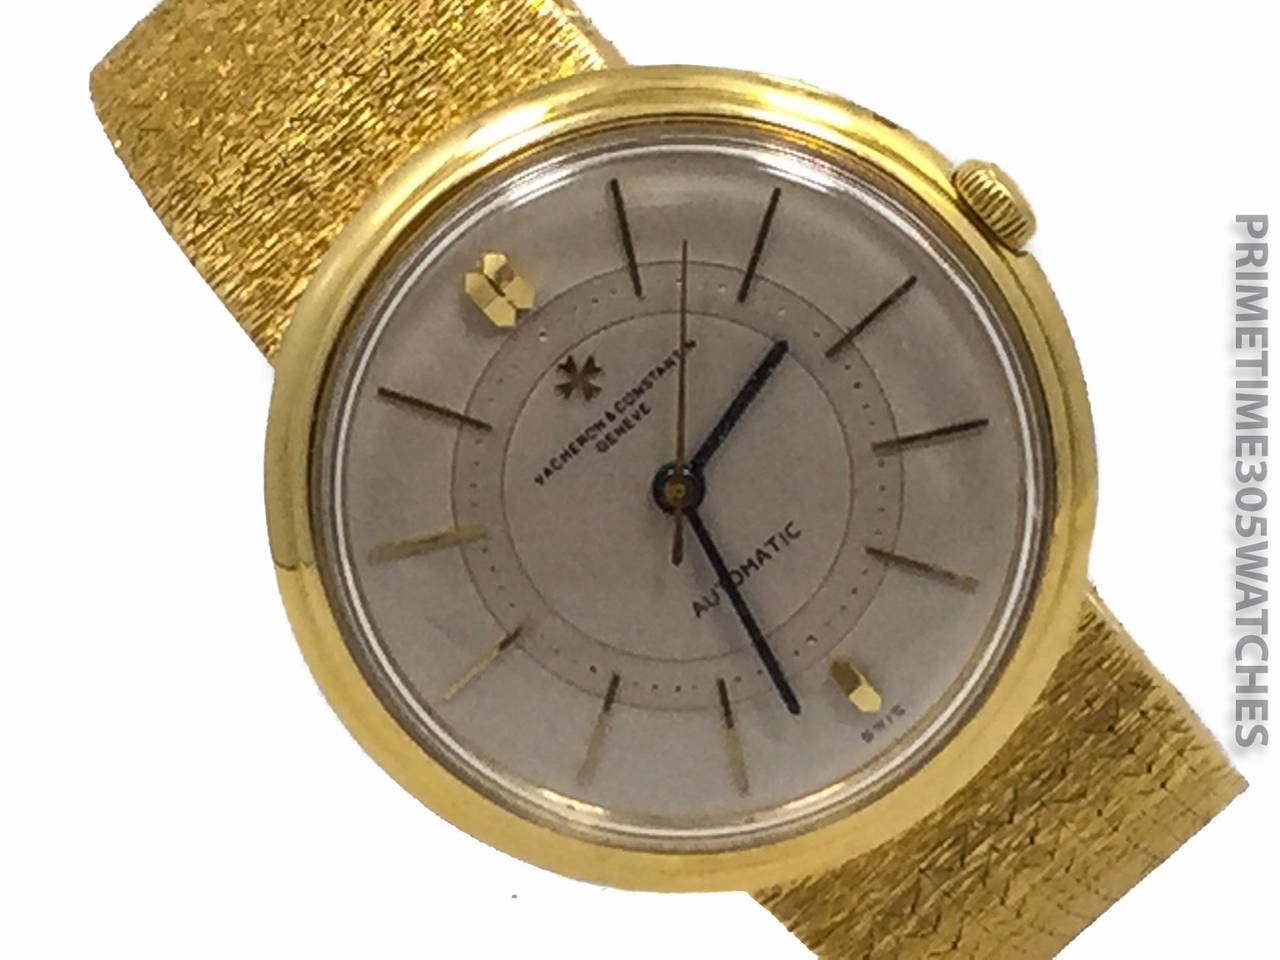 Vintage Mens Vacheron Constantin Automatic 18k Yellow Gold Screw-Back Watch On a Bracelet. The Watch is in Great Condition & Keeping Perfect Time. The Bracelet is Solid 18k Yellow Gold, Though it is Aftermarket, The Bracelet is Adjustable to fit